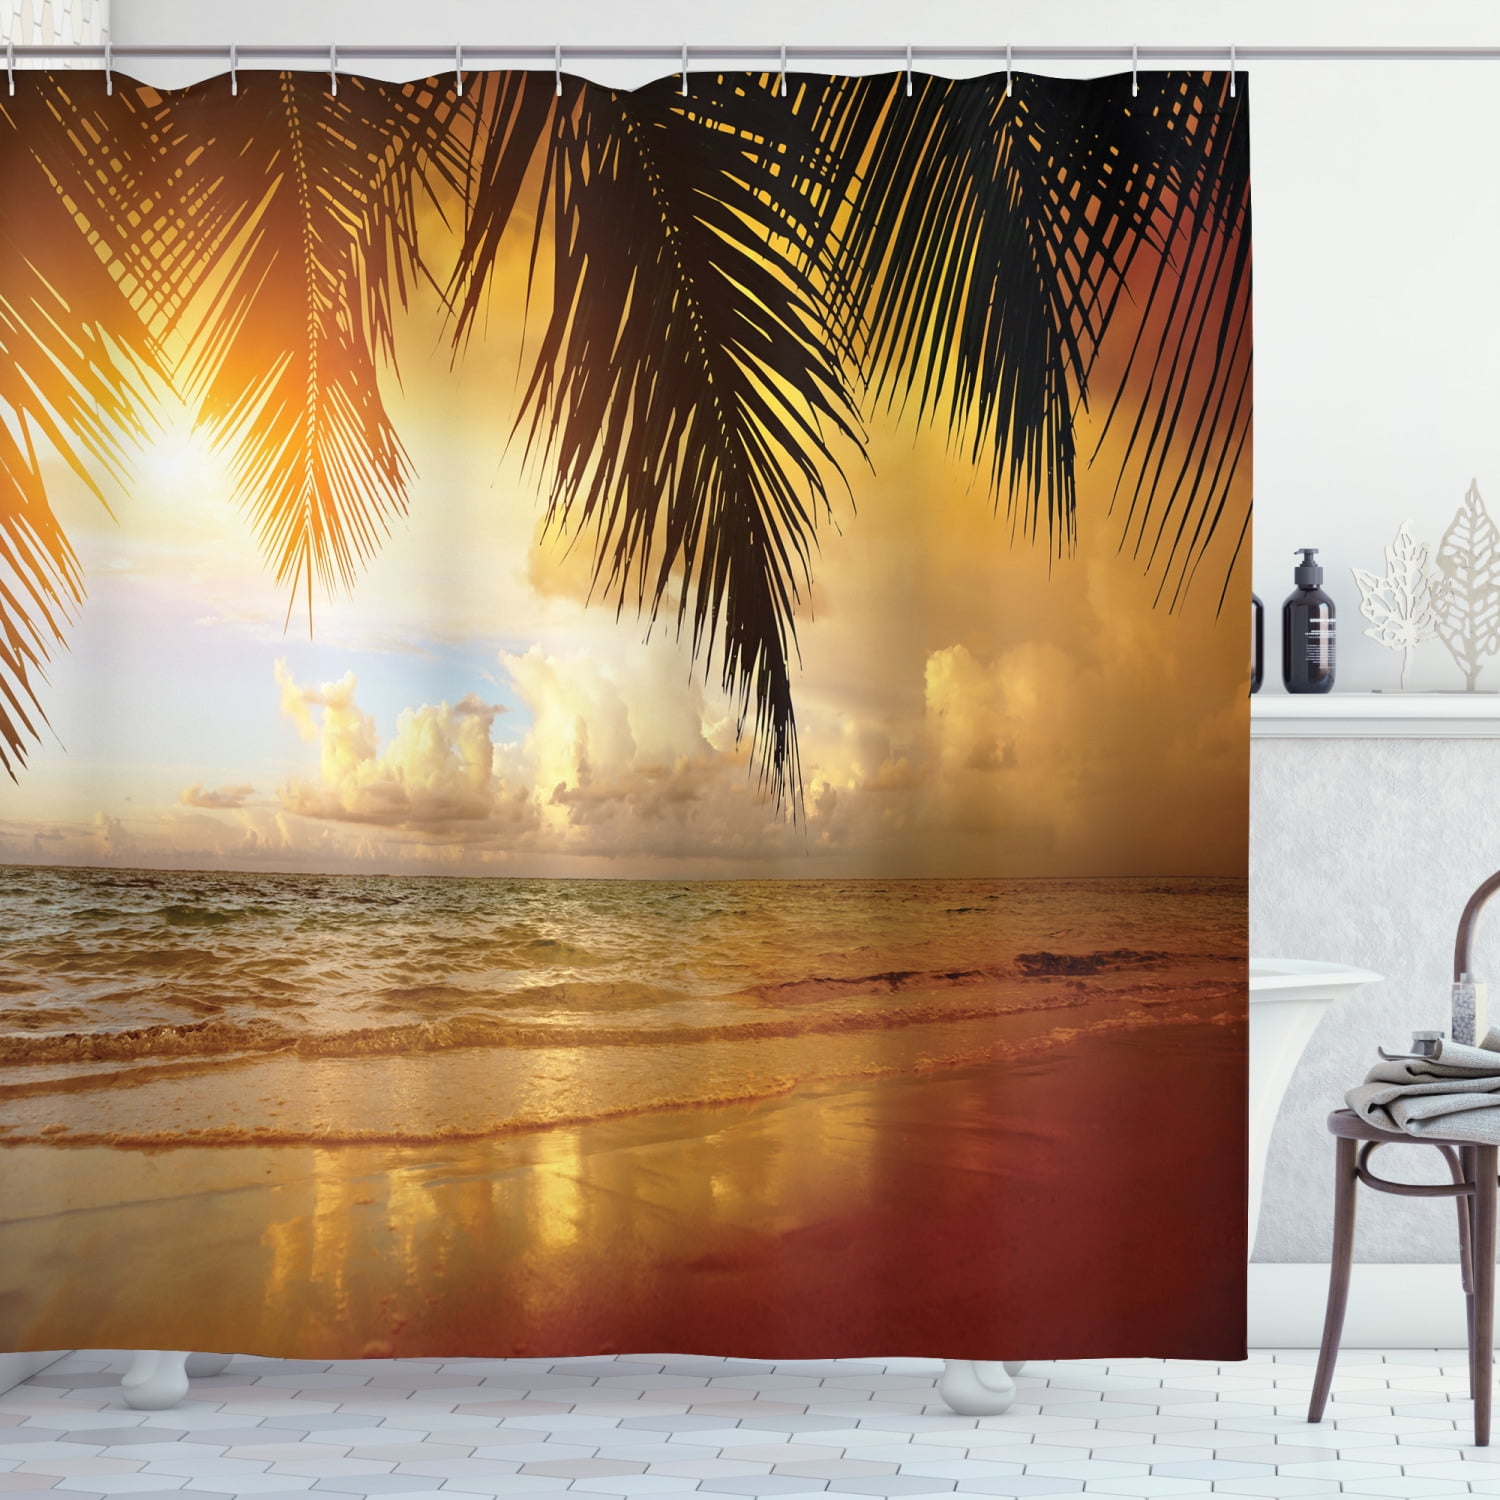 72X72" Seychelles Beach in Sunset Time Waterproof Fabric Shower Curtain Liner 